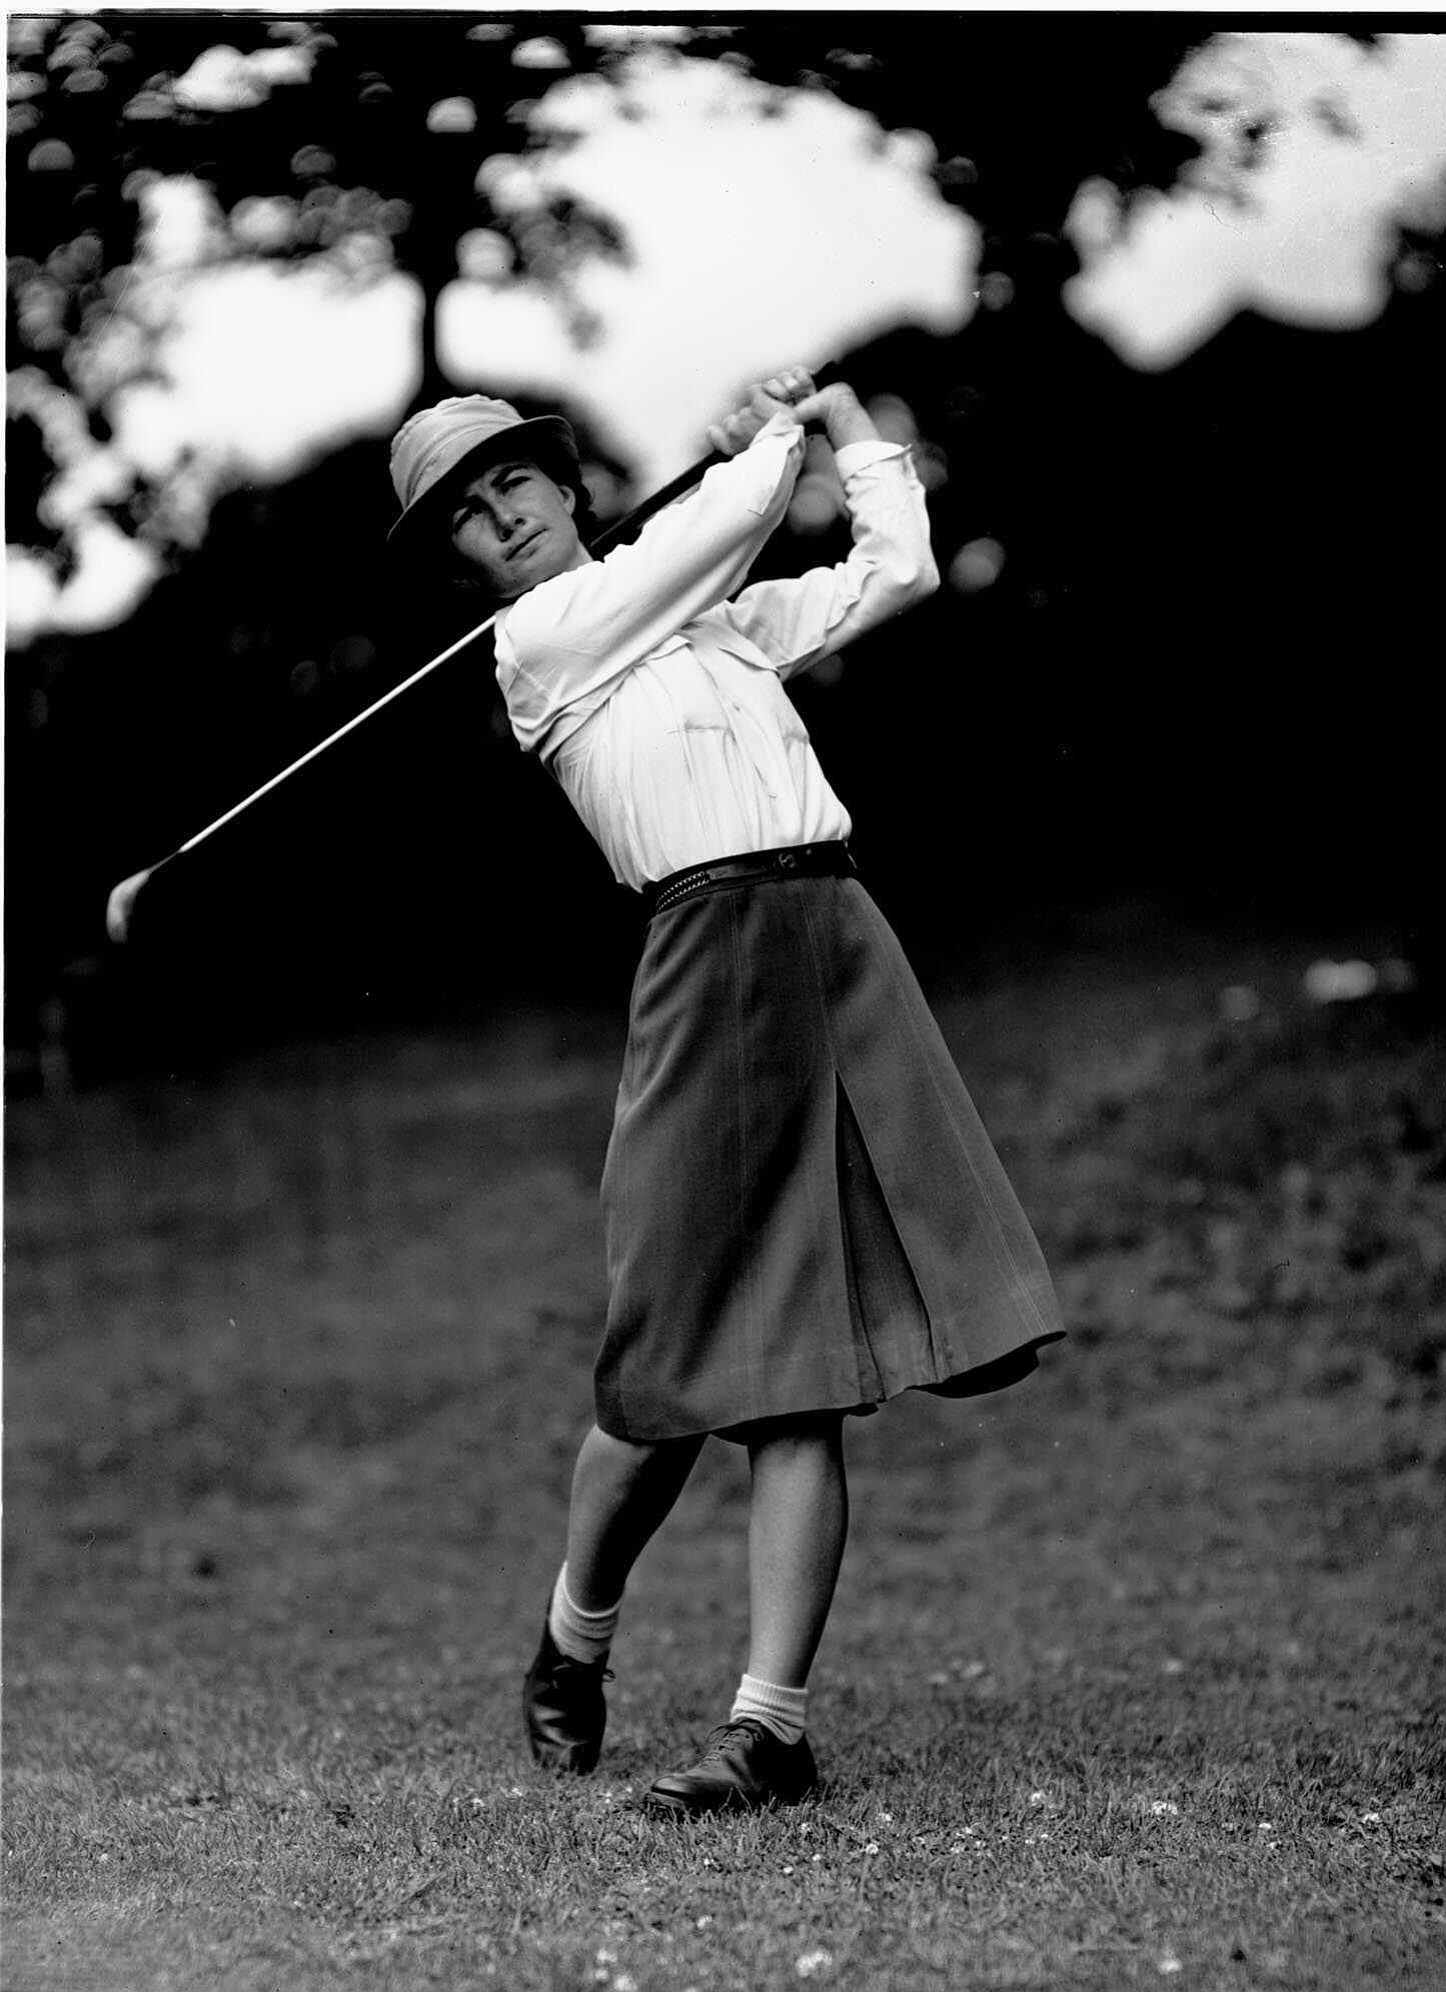 The LPGA Tour says Louis Suggs, pictured here in June 1946, an LPGA founder and one of the greatest female golfers of all time, died Friday, Aug. 7, 2015, in Sarasota, Fla. She was 91. The LPGA did not list a cause of death.